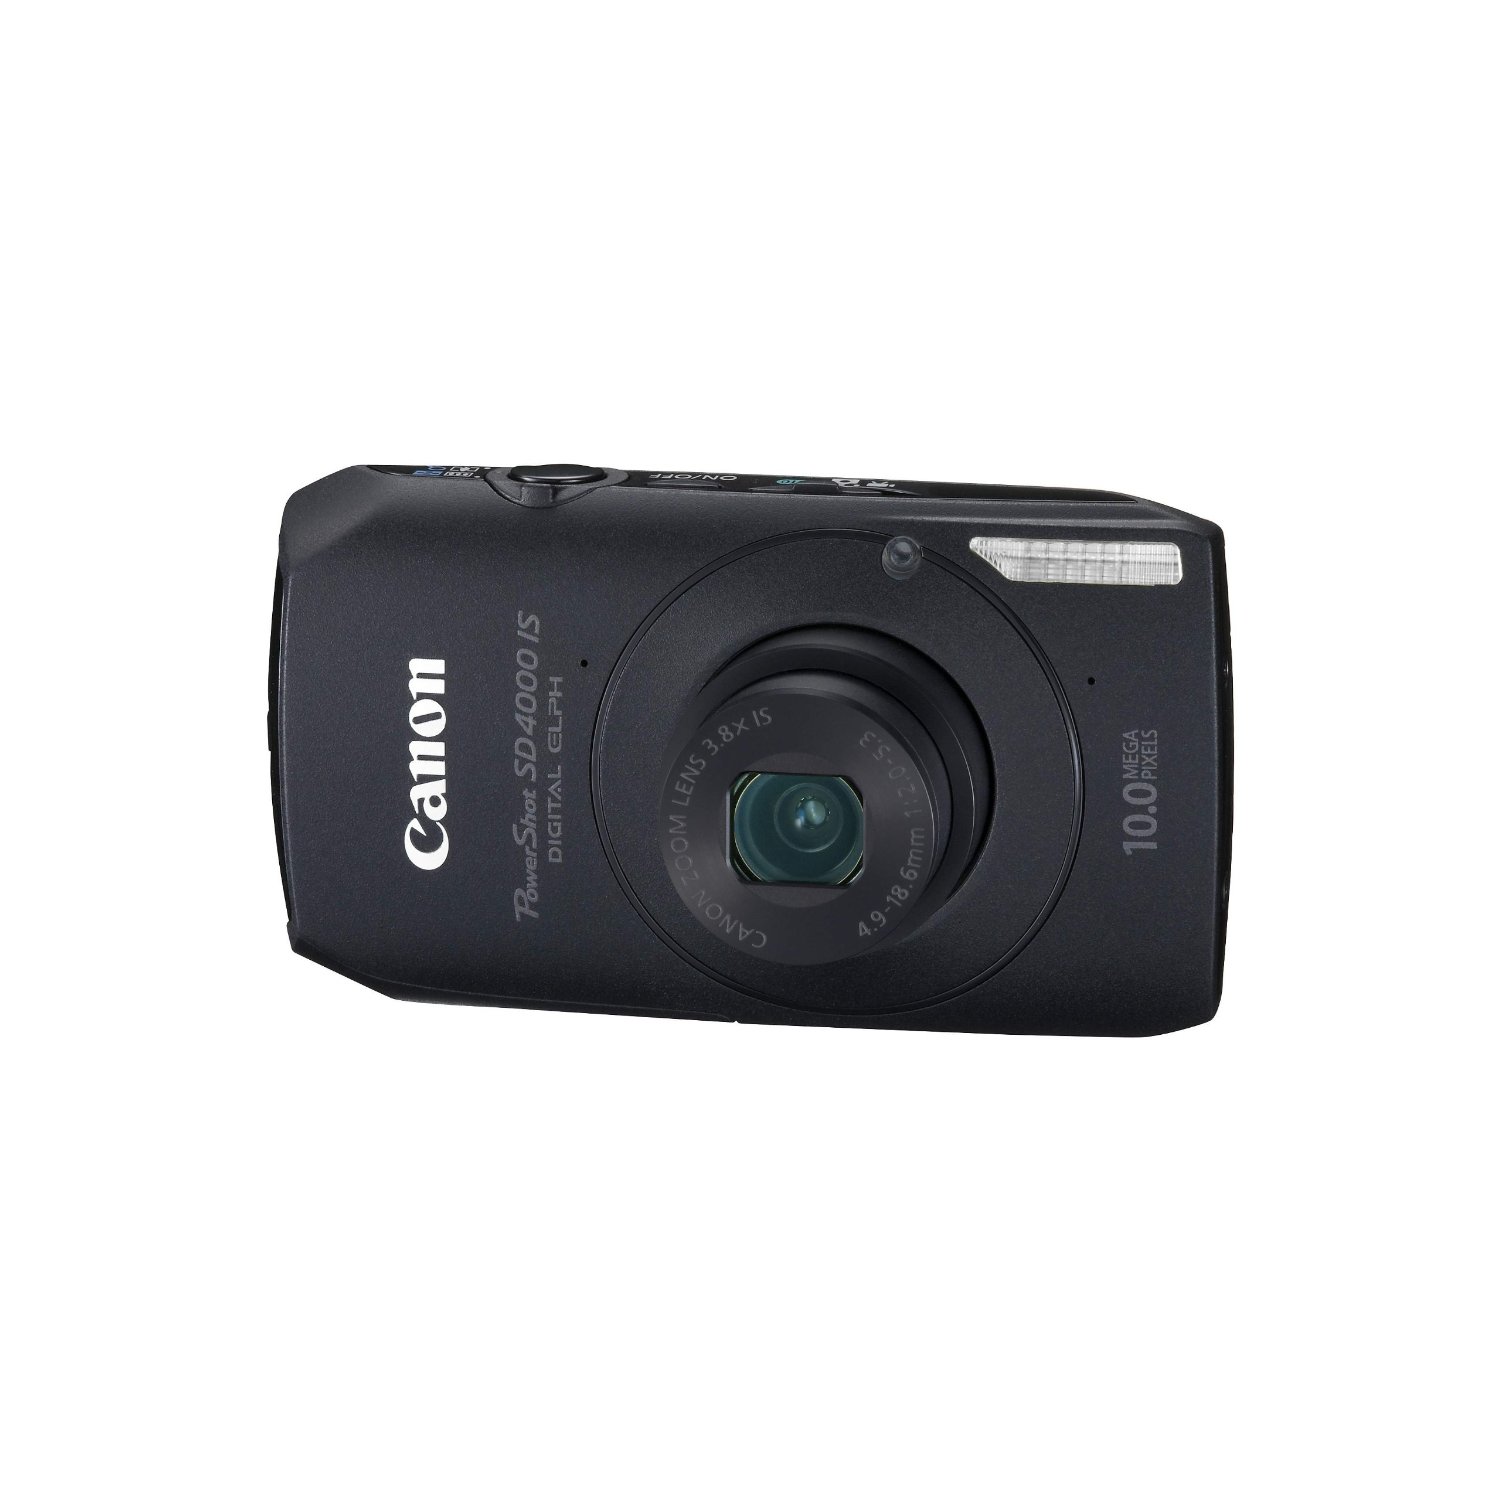 http://thetechjournal.com/wp-content/uploads/images/1109/1316083020-canon-powershot-sd4000is-10-mp-cmos-digital-camera-1.jpg